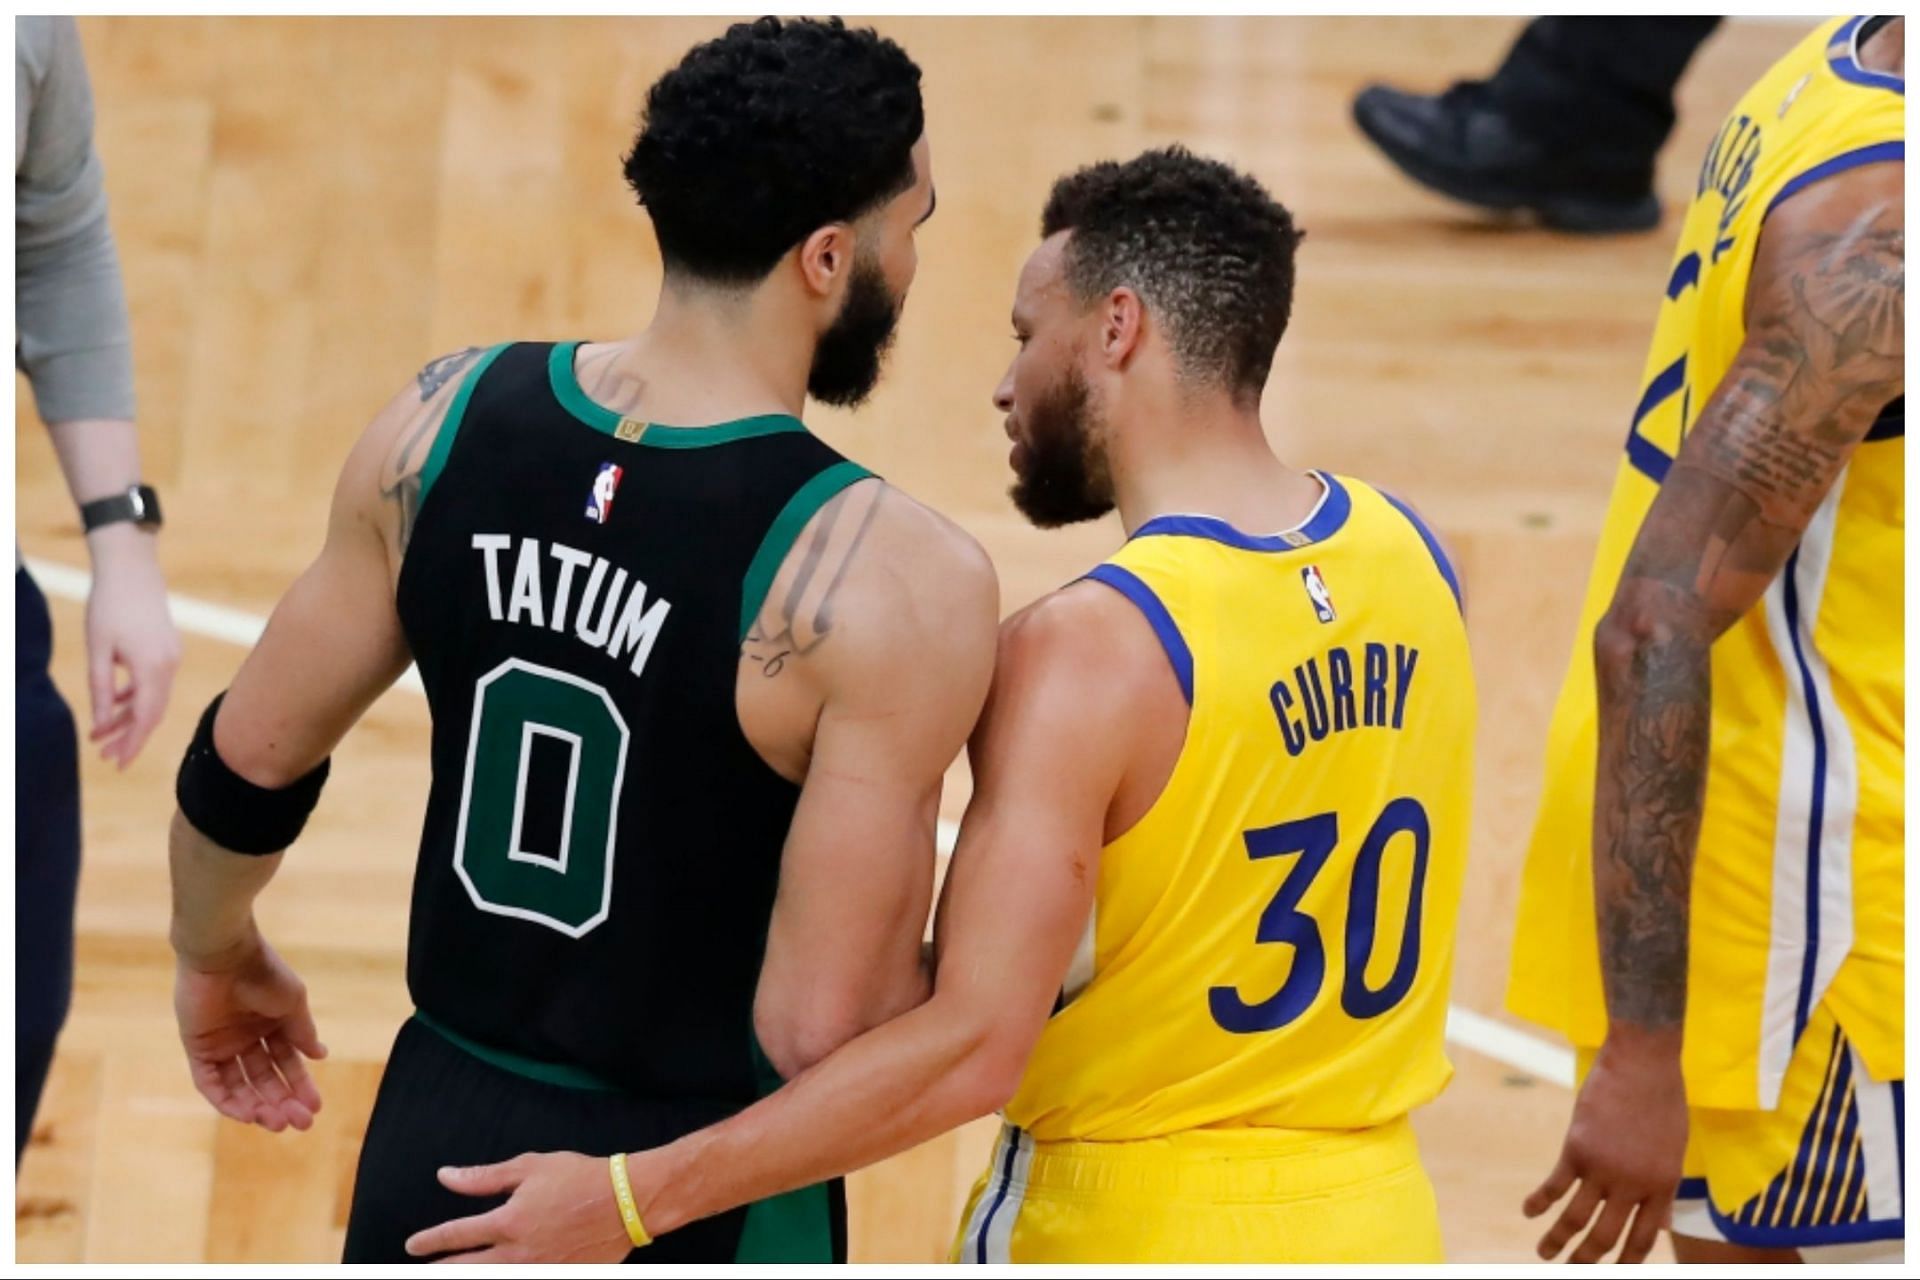 Jayson Tatum (left) and Stephen Curry (right) are among the candidates for the NBA regular-season MVP (AP Photo/Michael Dwyer)